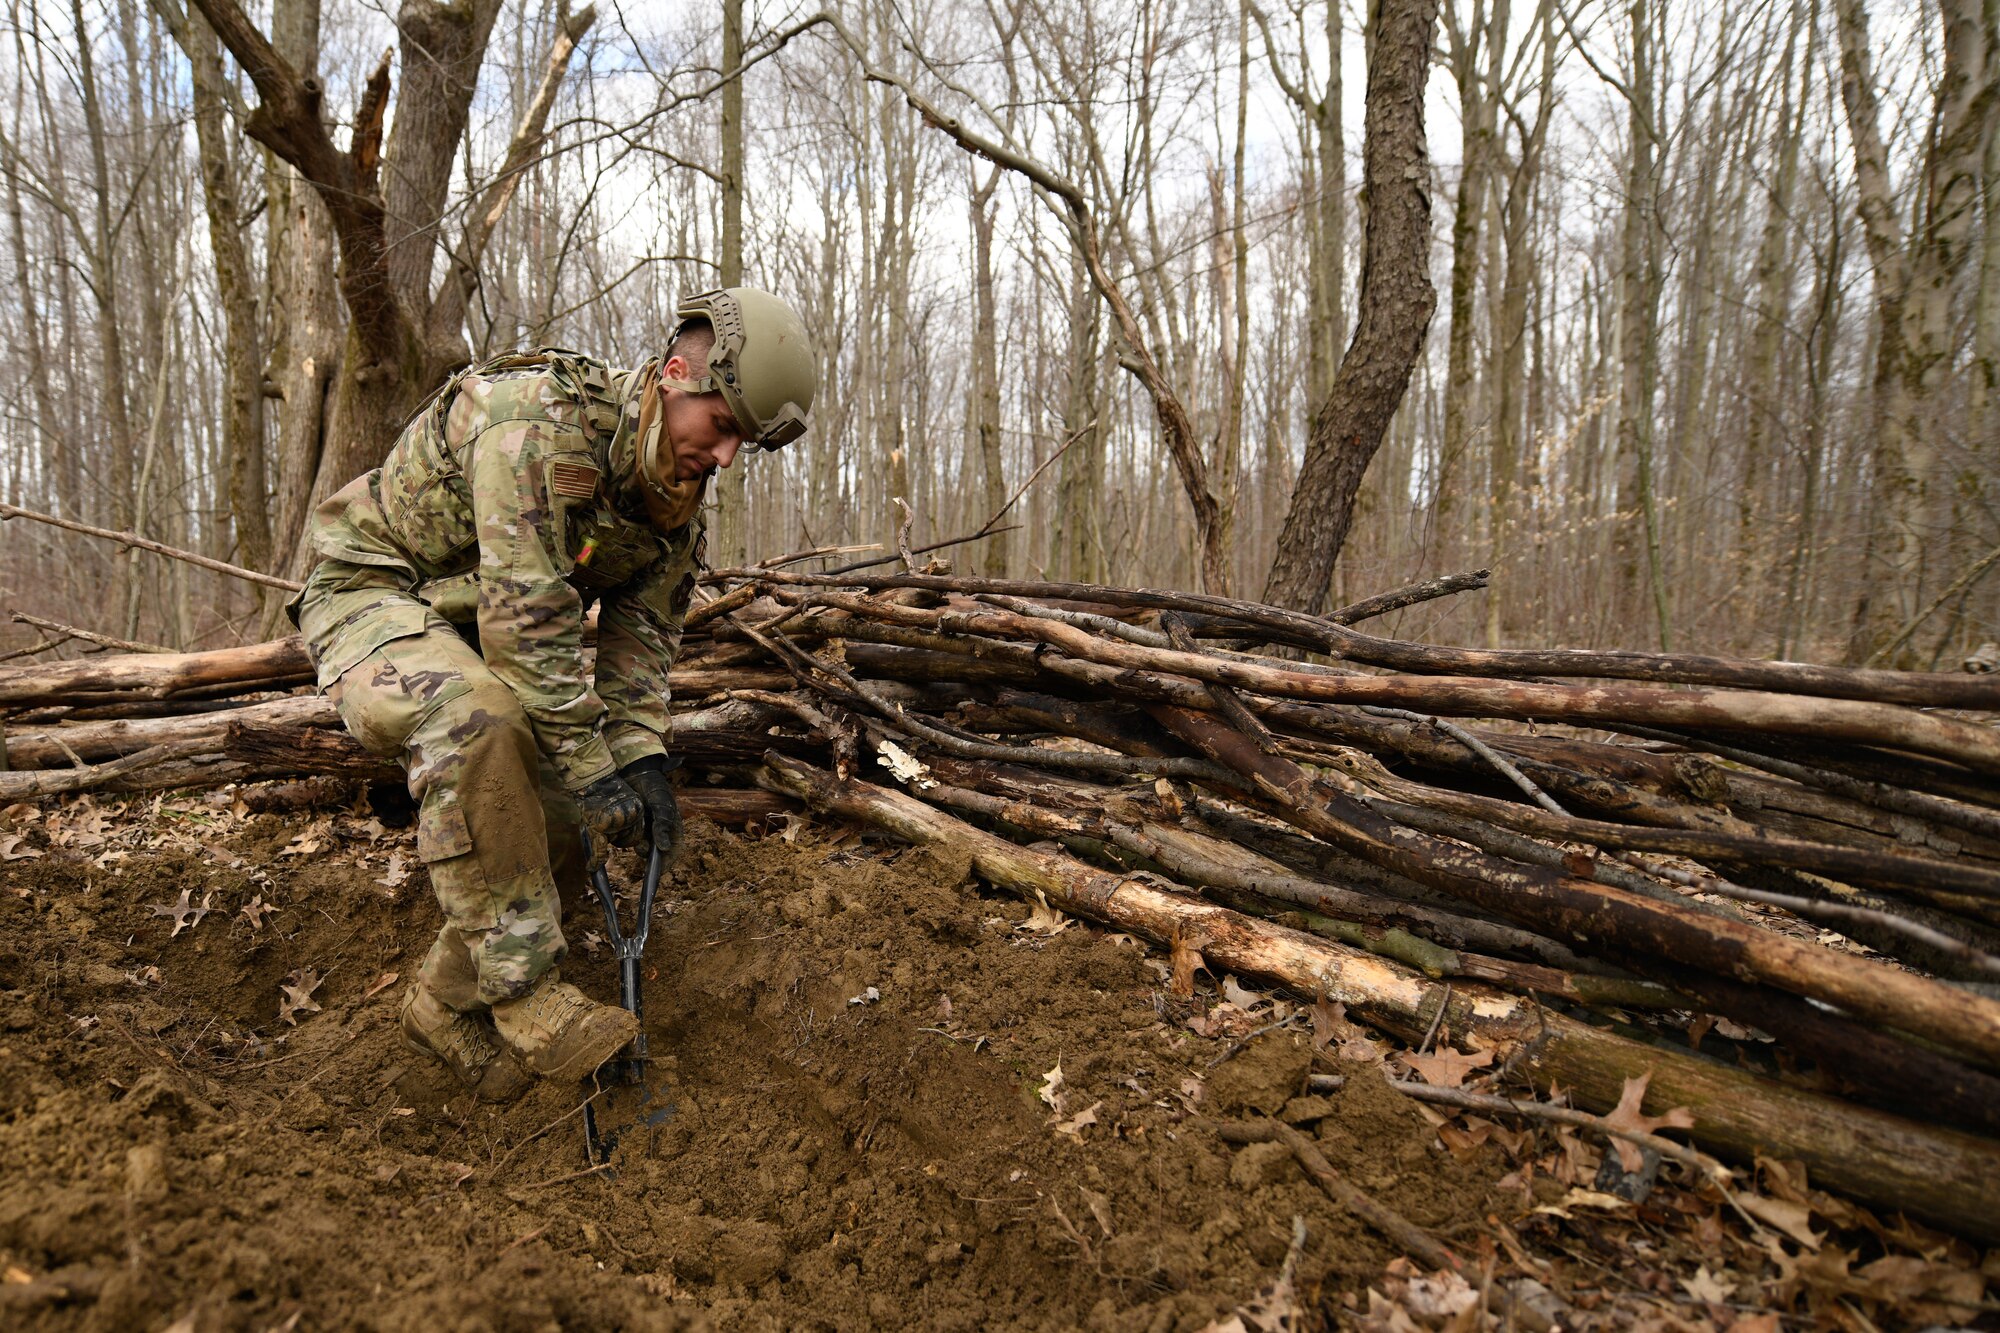 The 910th Civil Engineer Squadron joined the 910th Security Forces Squadron for a 24-hour field exercise in which the units established a bare base and provided perimeter defense, March 31 to April 1, 2022.